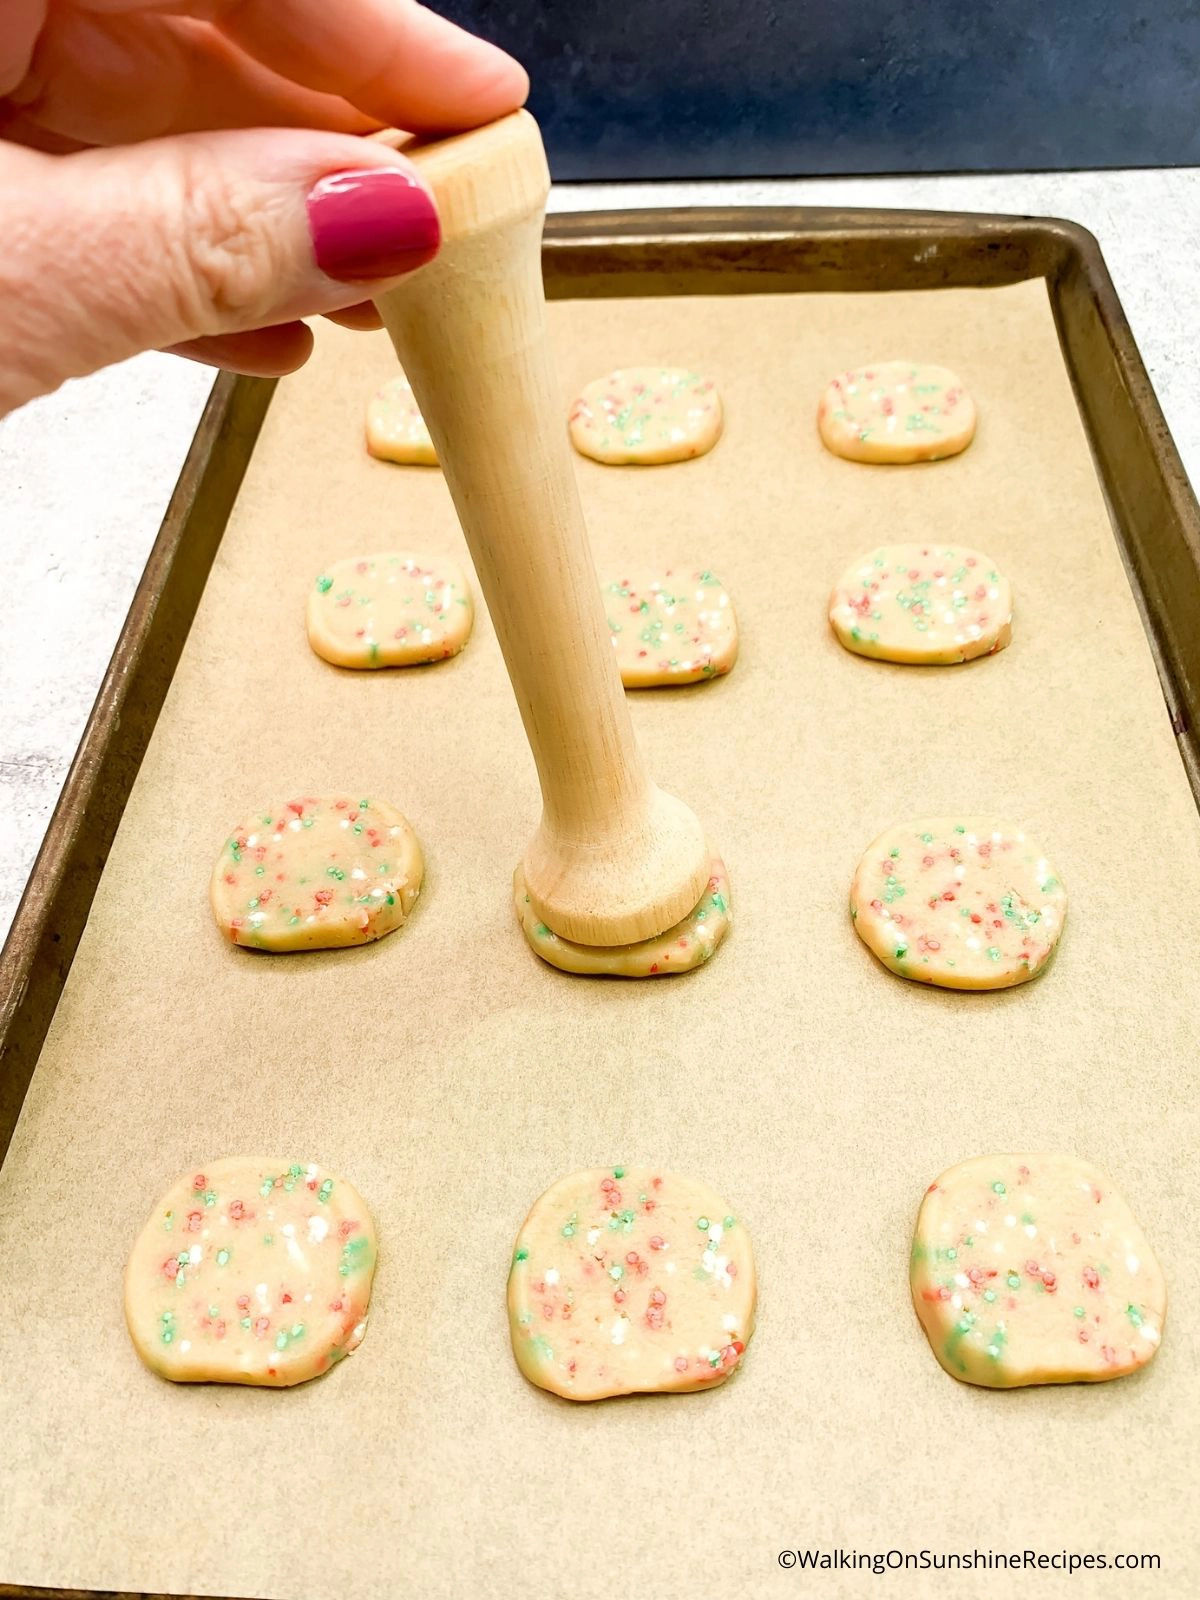 Press out cookie dough using tart tamper.